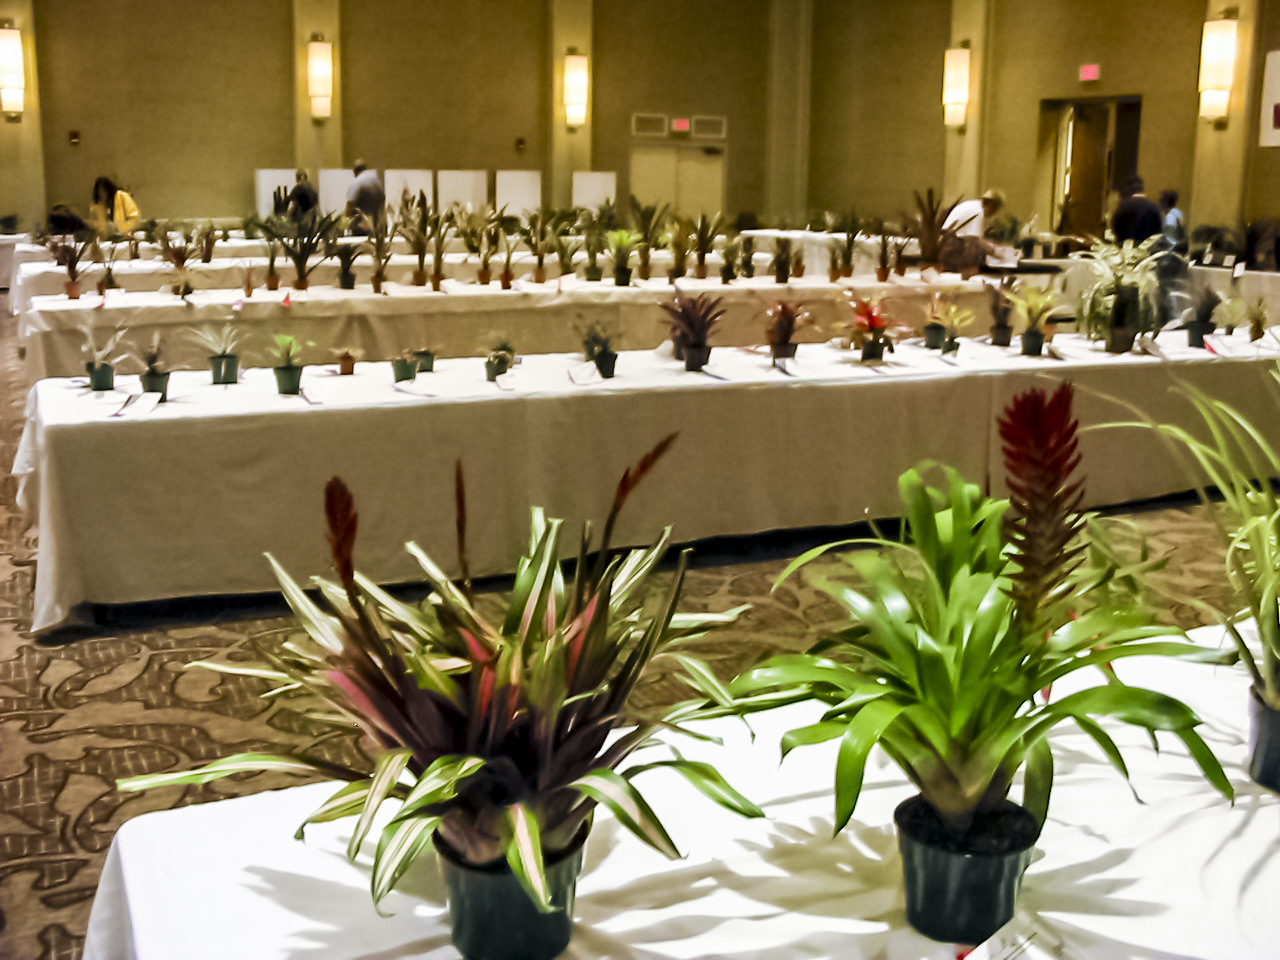 Bromeliads arranged for judging at the International Bromeliad Conference Chicago 2004